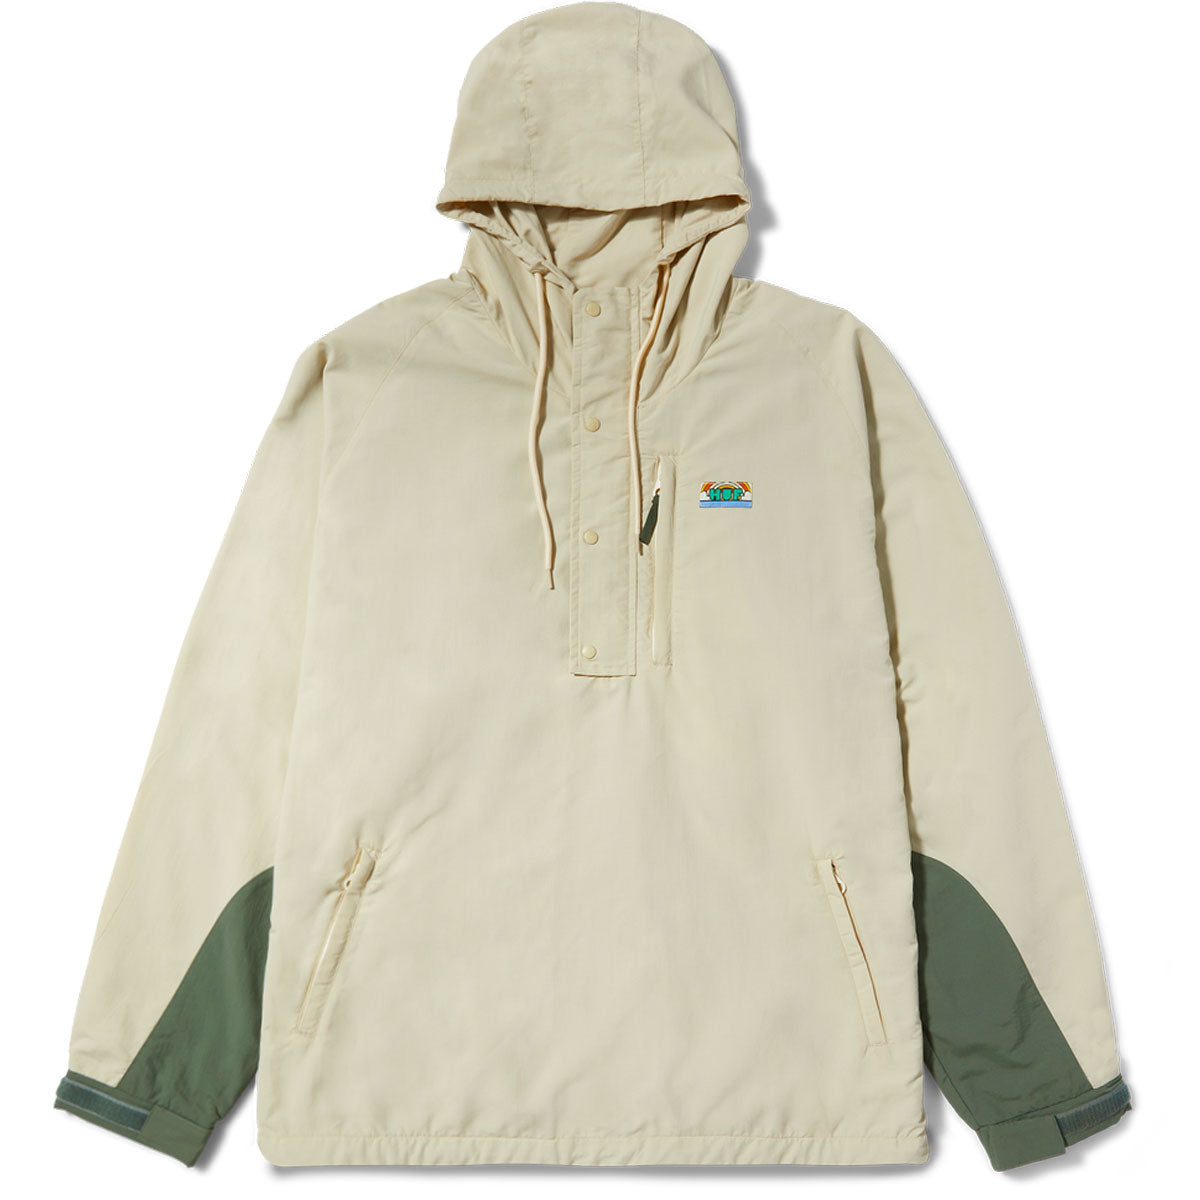 HUF New Day Packable Anorak Jacket - Cream image 2